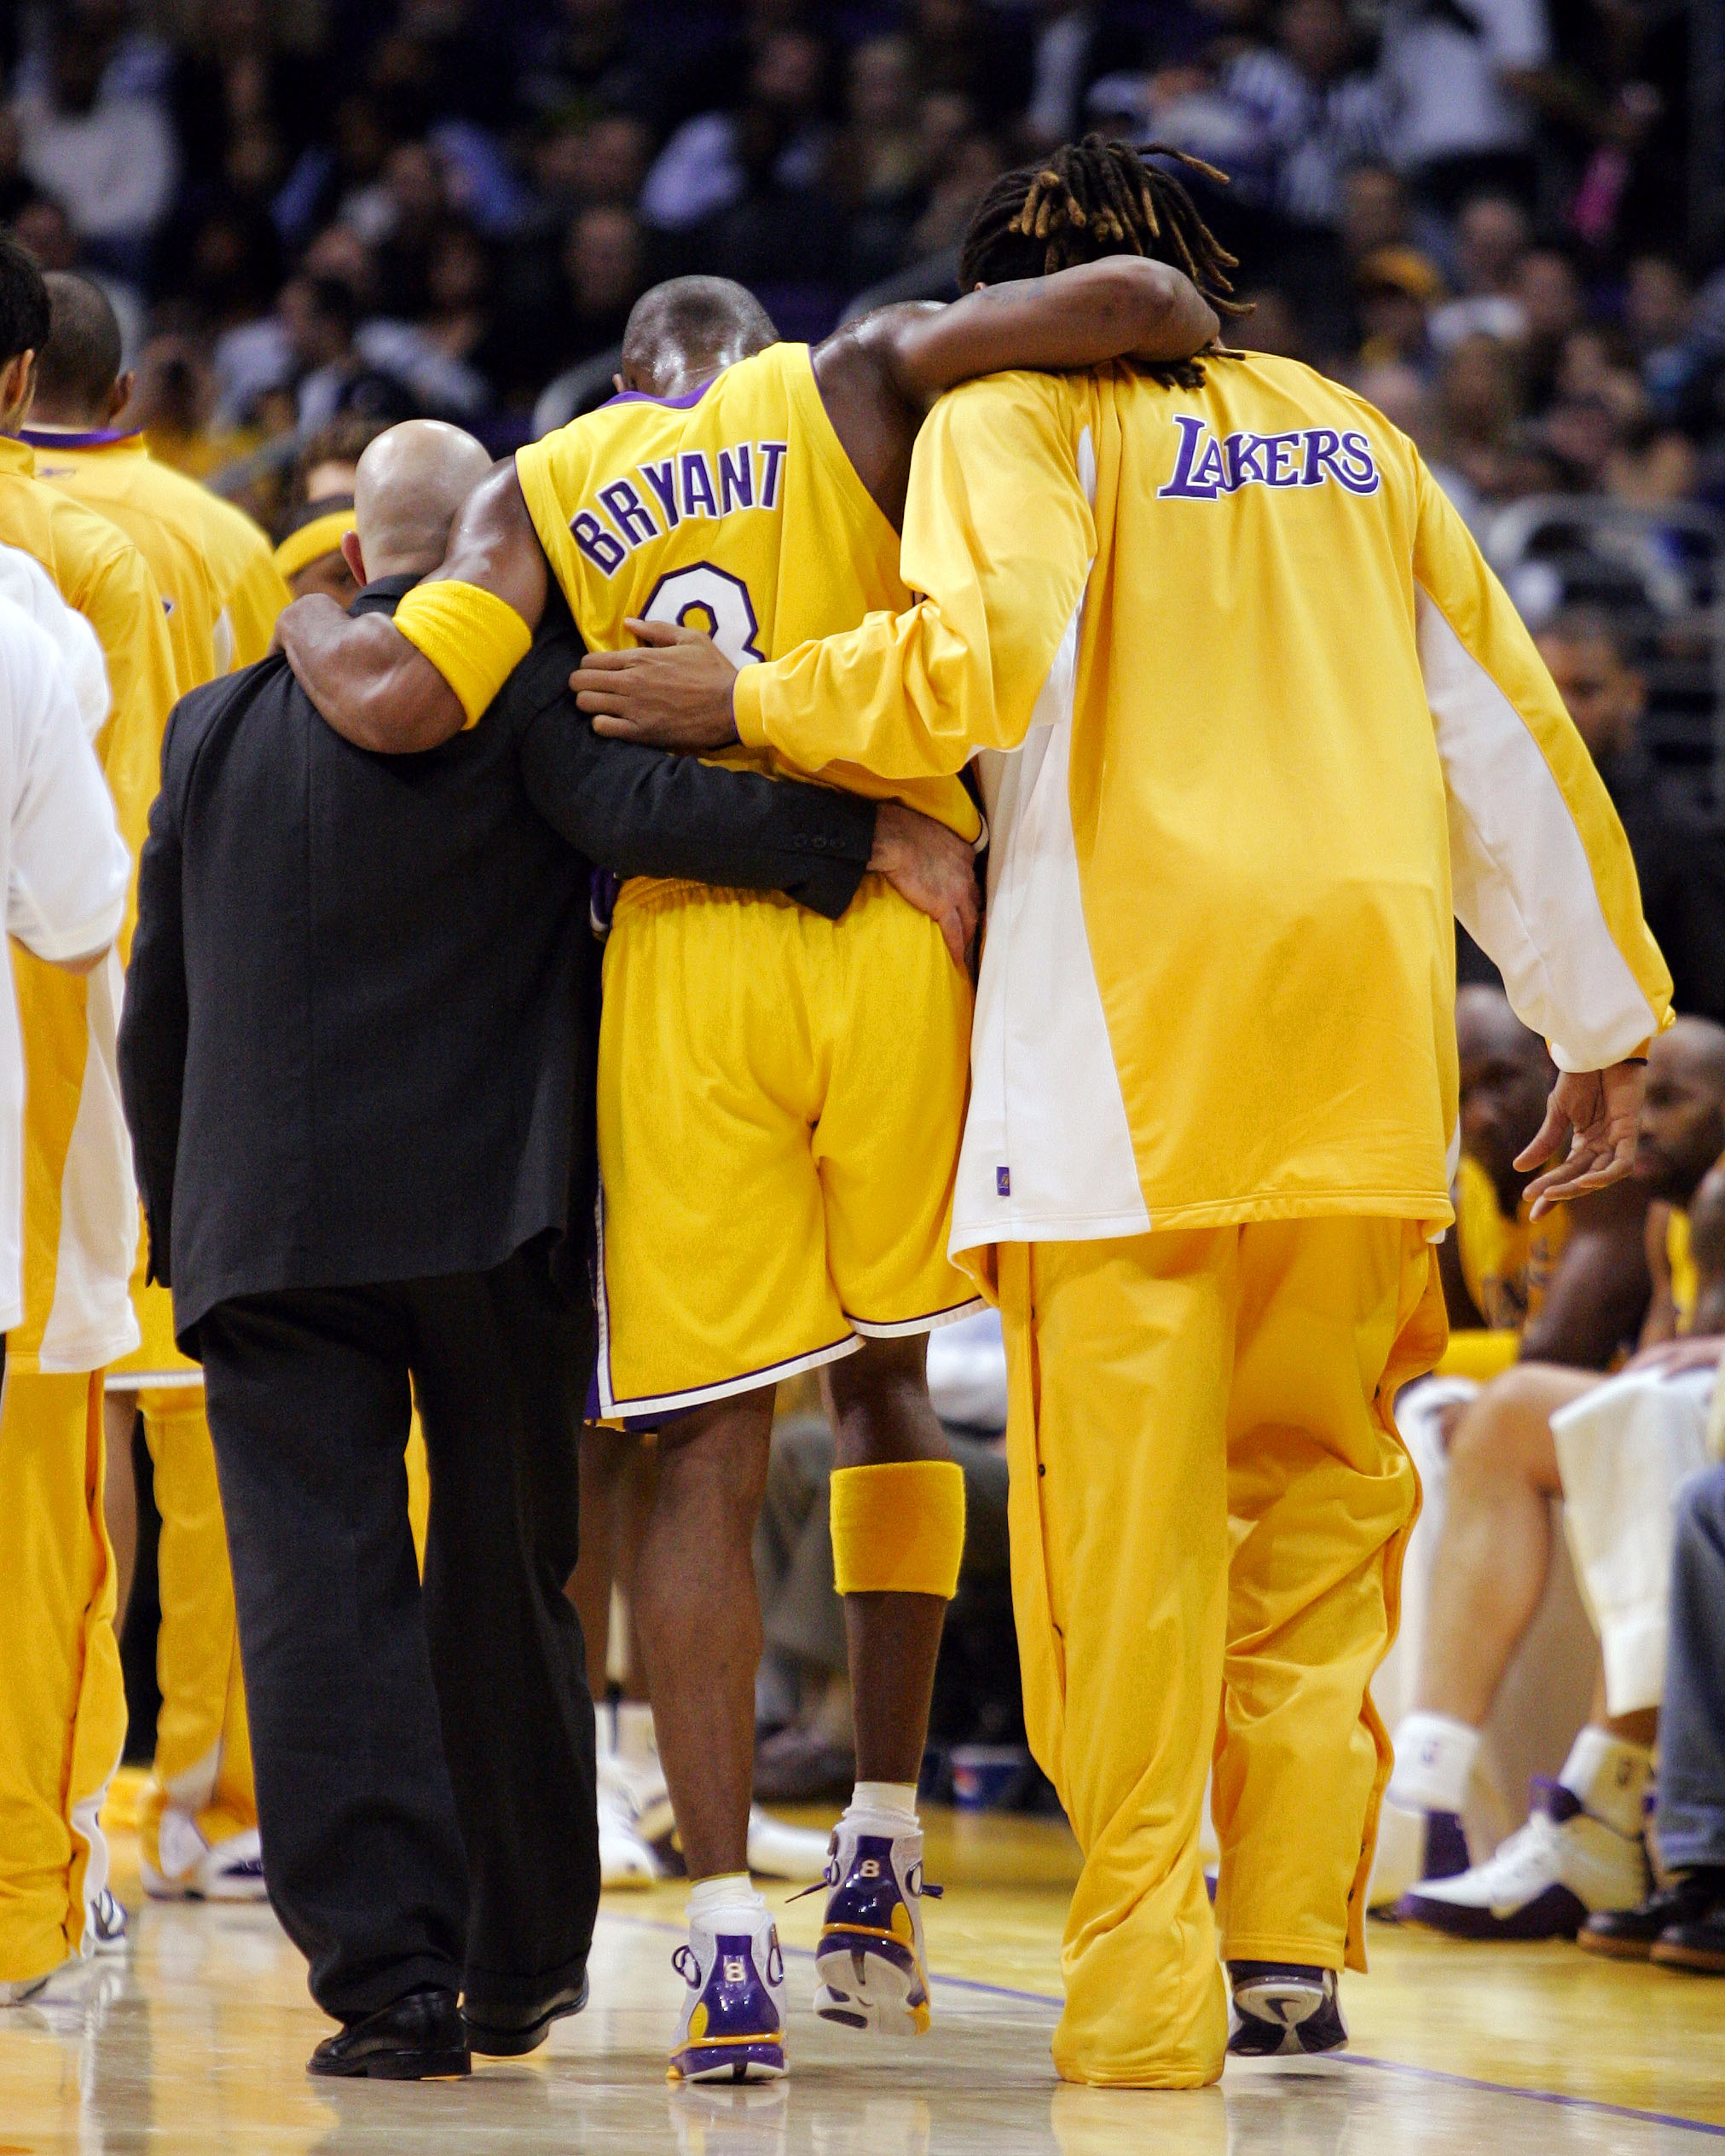 Kobe, Shaq And Phil: The Inside Story Of A Powerful Lakers Dynasty